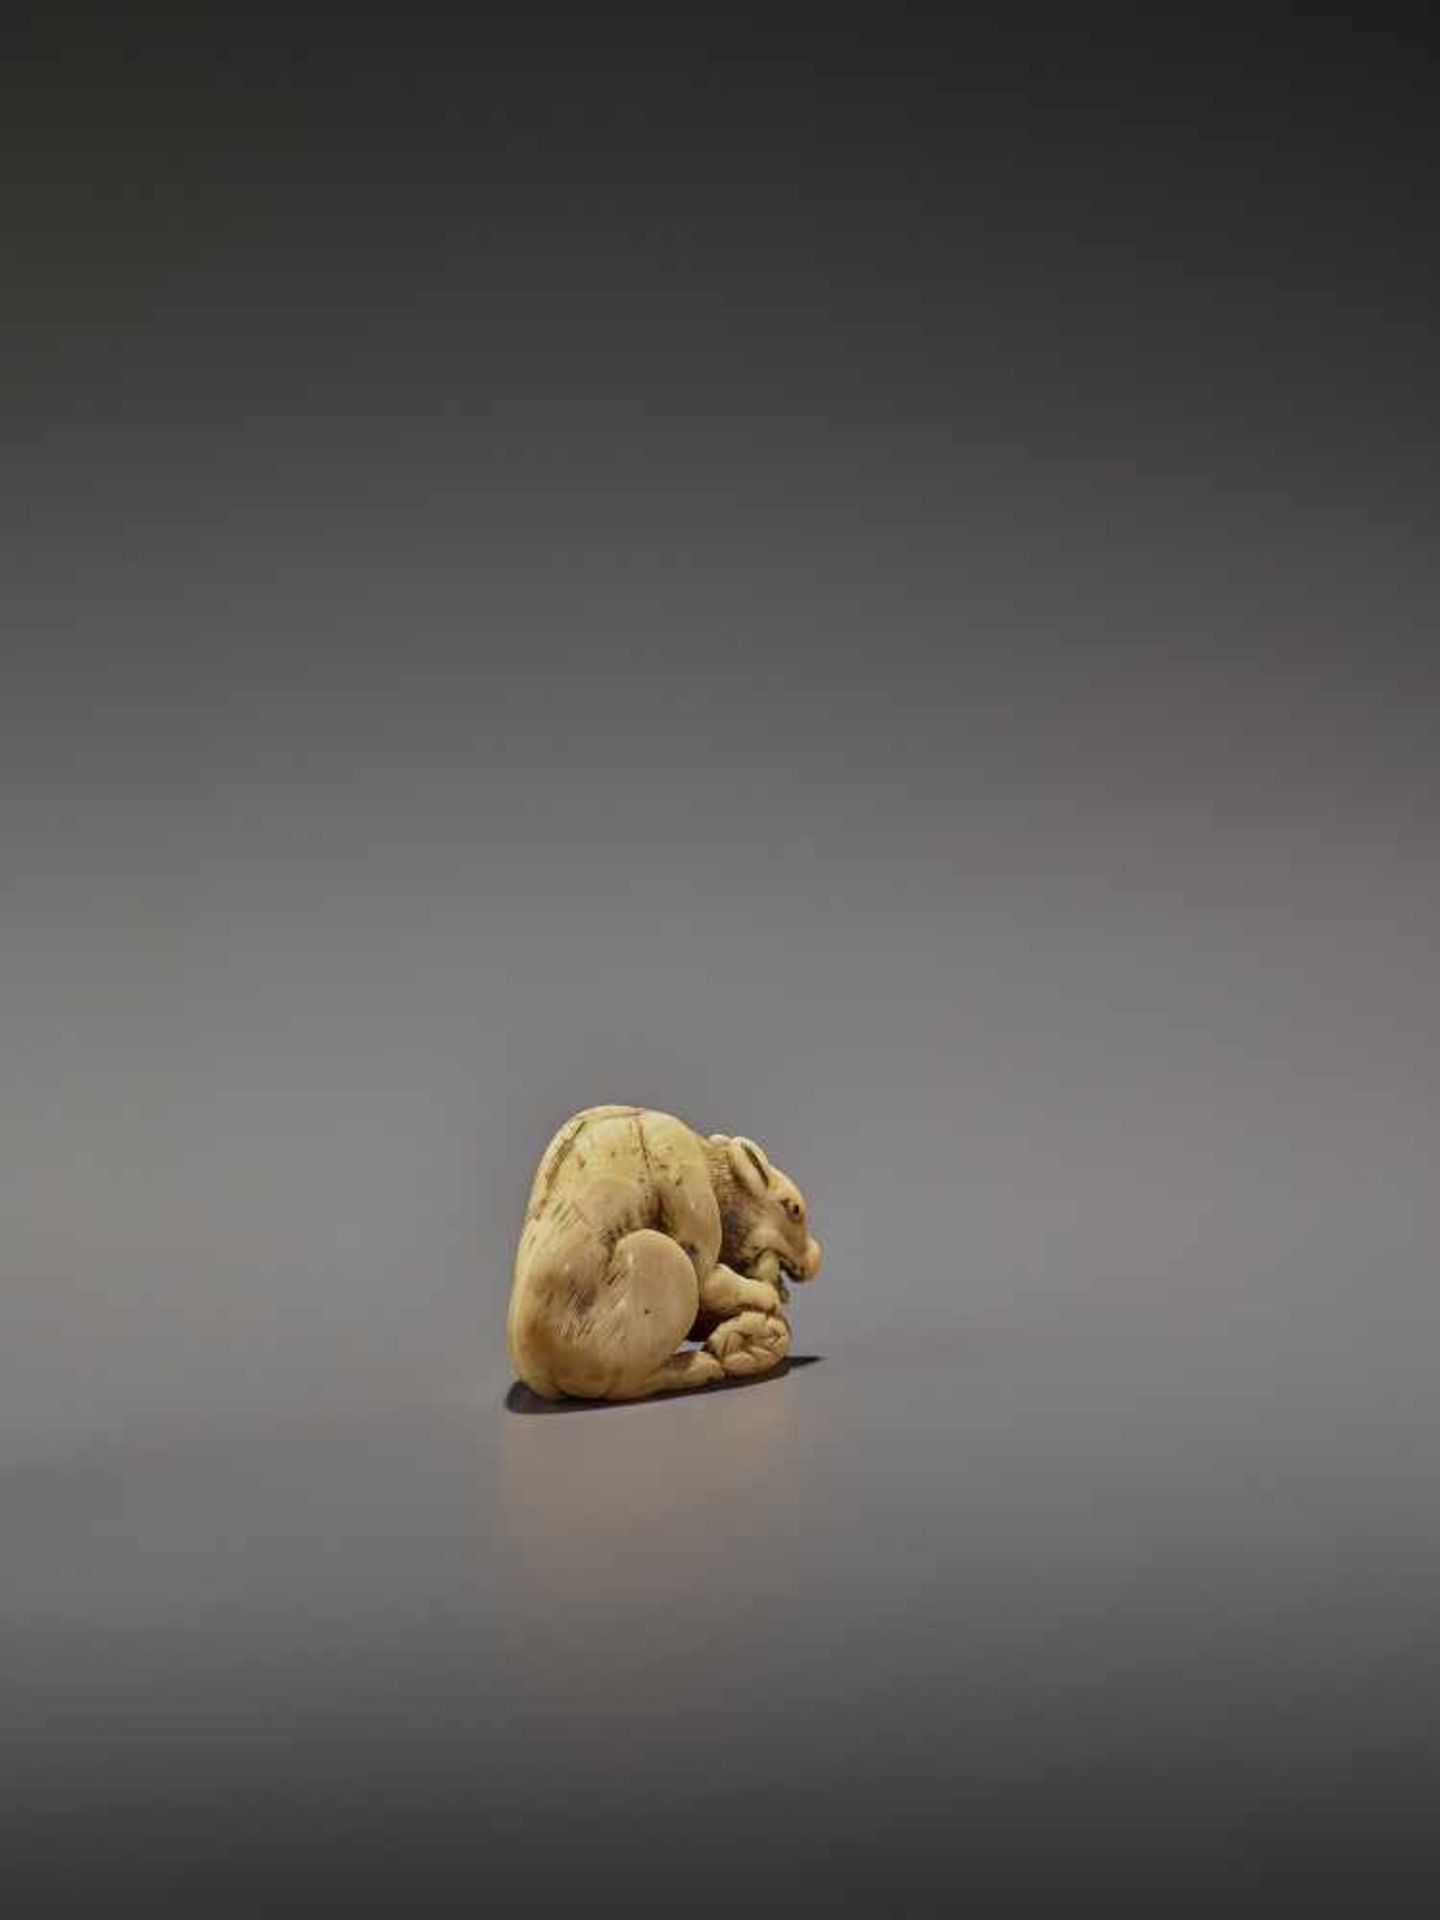 AN EARLY IVORY NETSUKE OF A WOLF WITH HAUNCH UnsignedJapan, Kyoto, 18th century, Edo period (1615- - Image 8 of 10